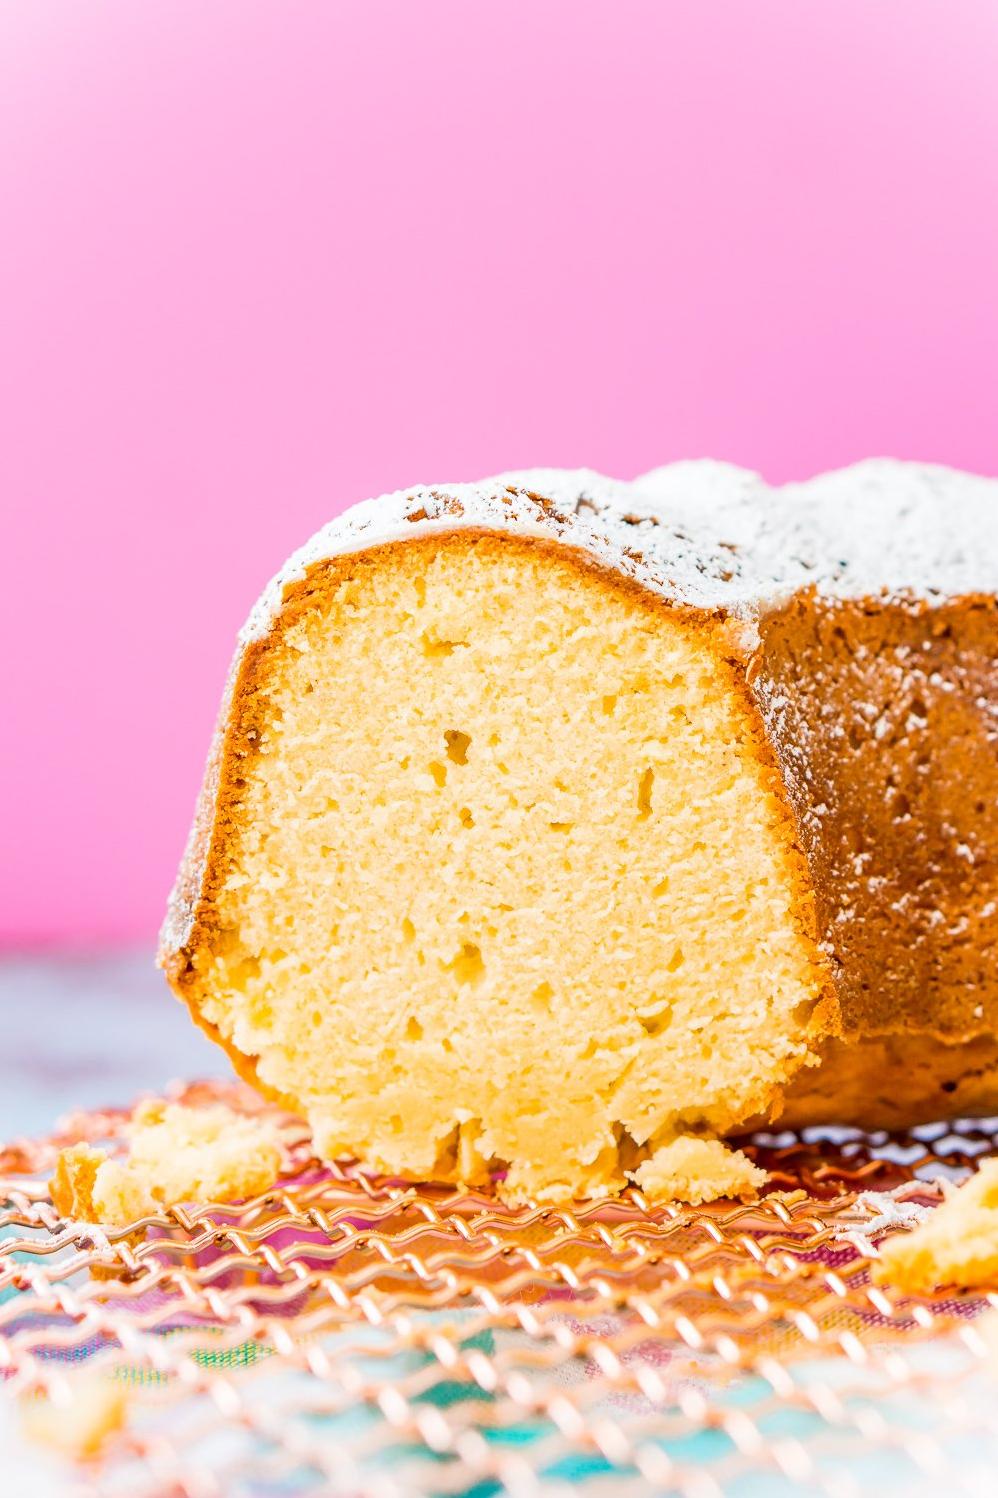  Cake for breakfast? With this Cream Cheese Pound Cake, anything is possible.